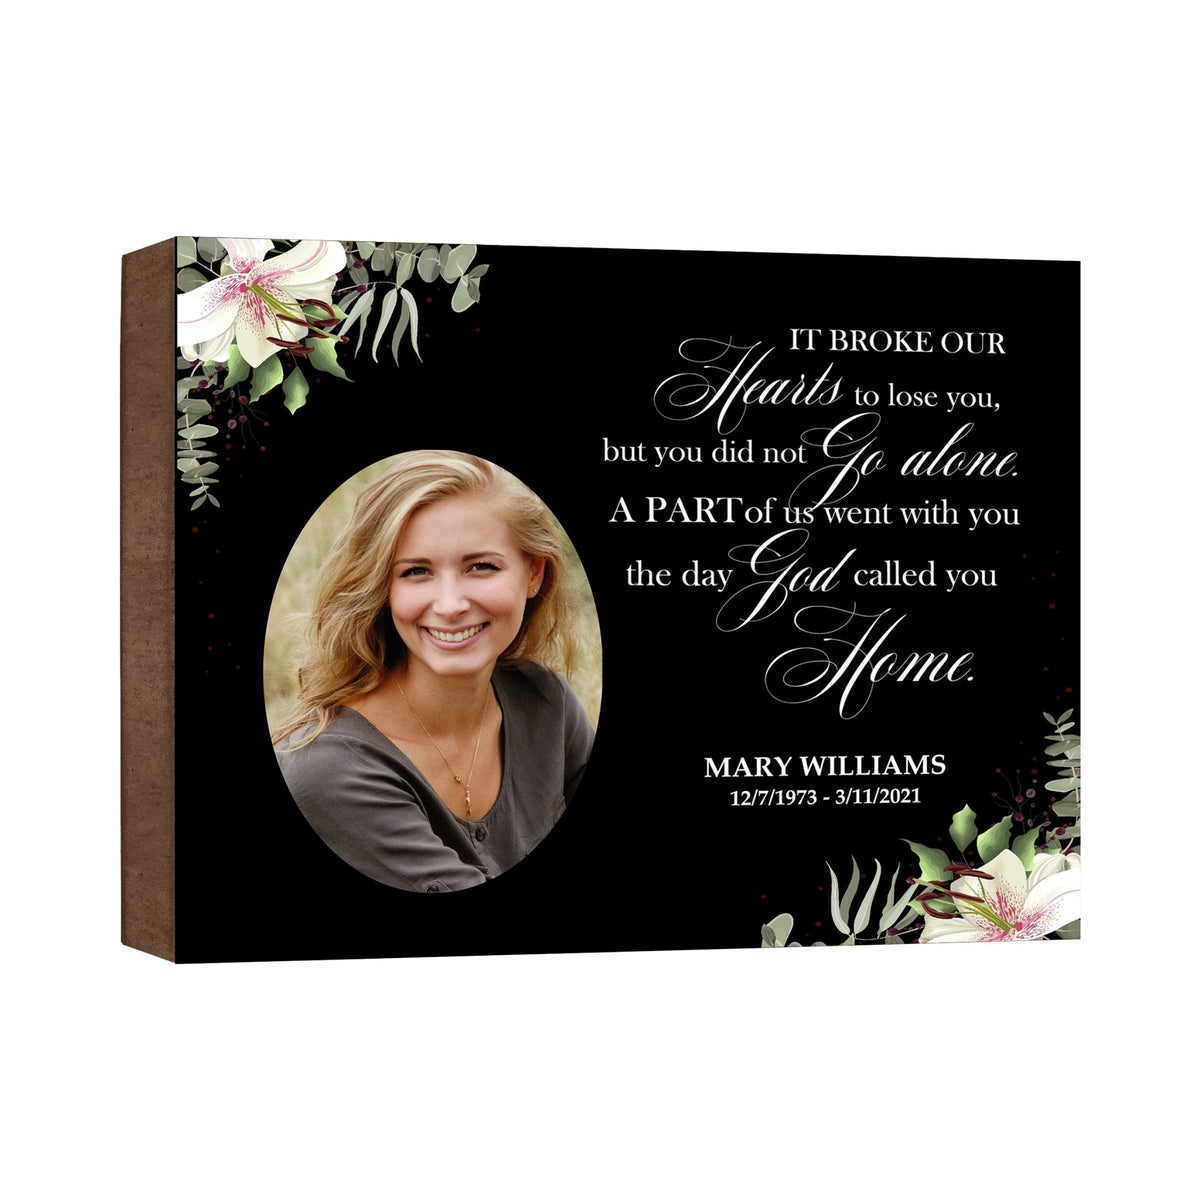 Personalized Human Memorial Black Photo &amp; Inspirational Verse Bereavement Wall Décor &amp; Sympathy Gift Ideas - It Broke Our Heart - LifeSong Milestones